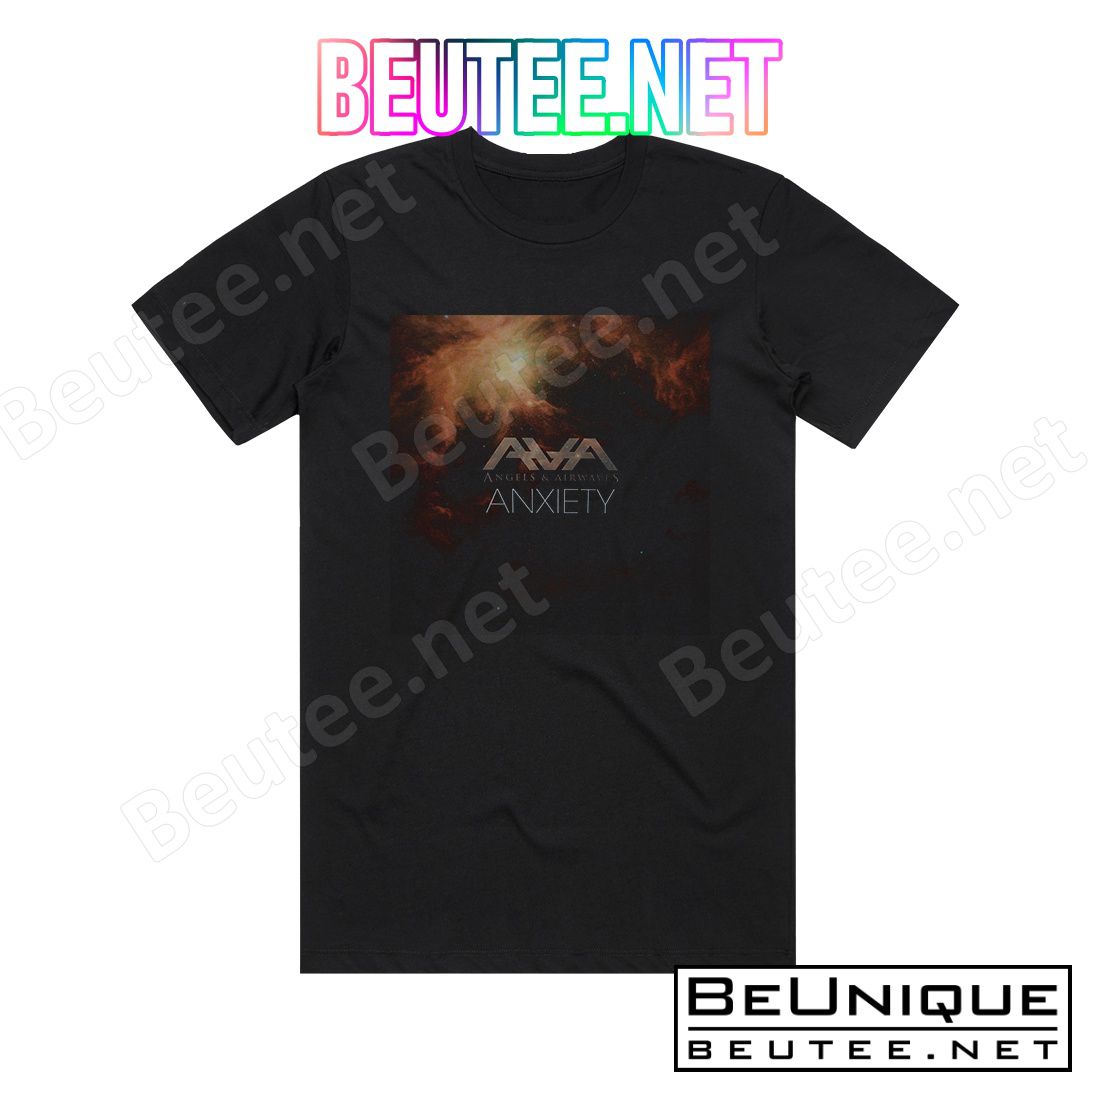 Angels and Airwaves Anxiety 1 Album Cover T-Shirt